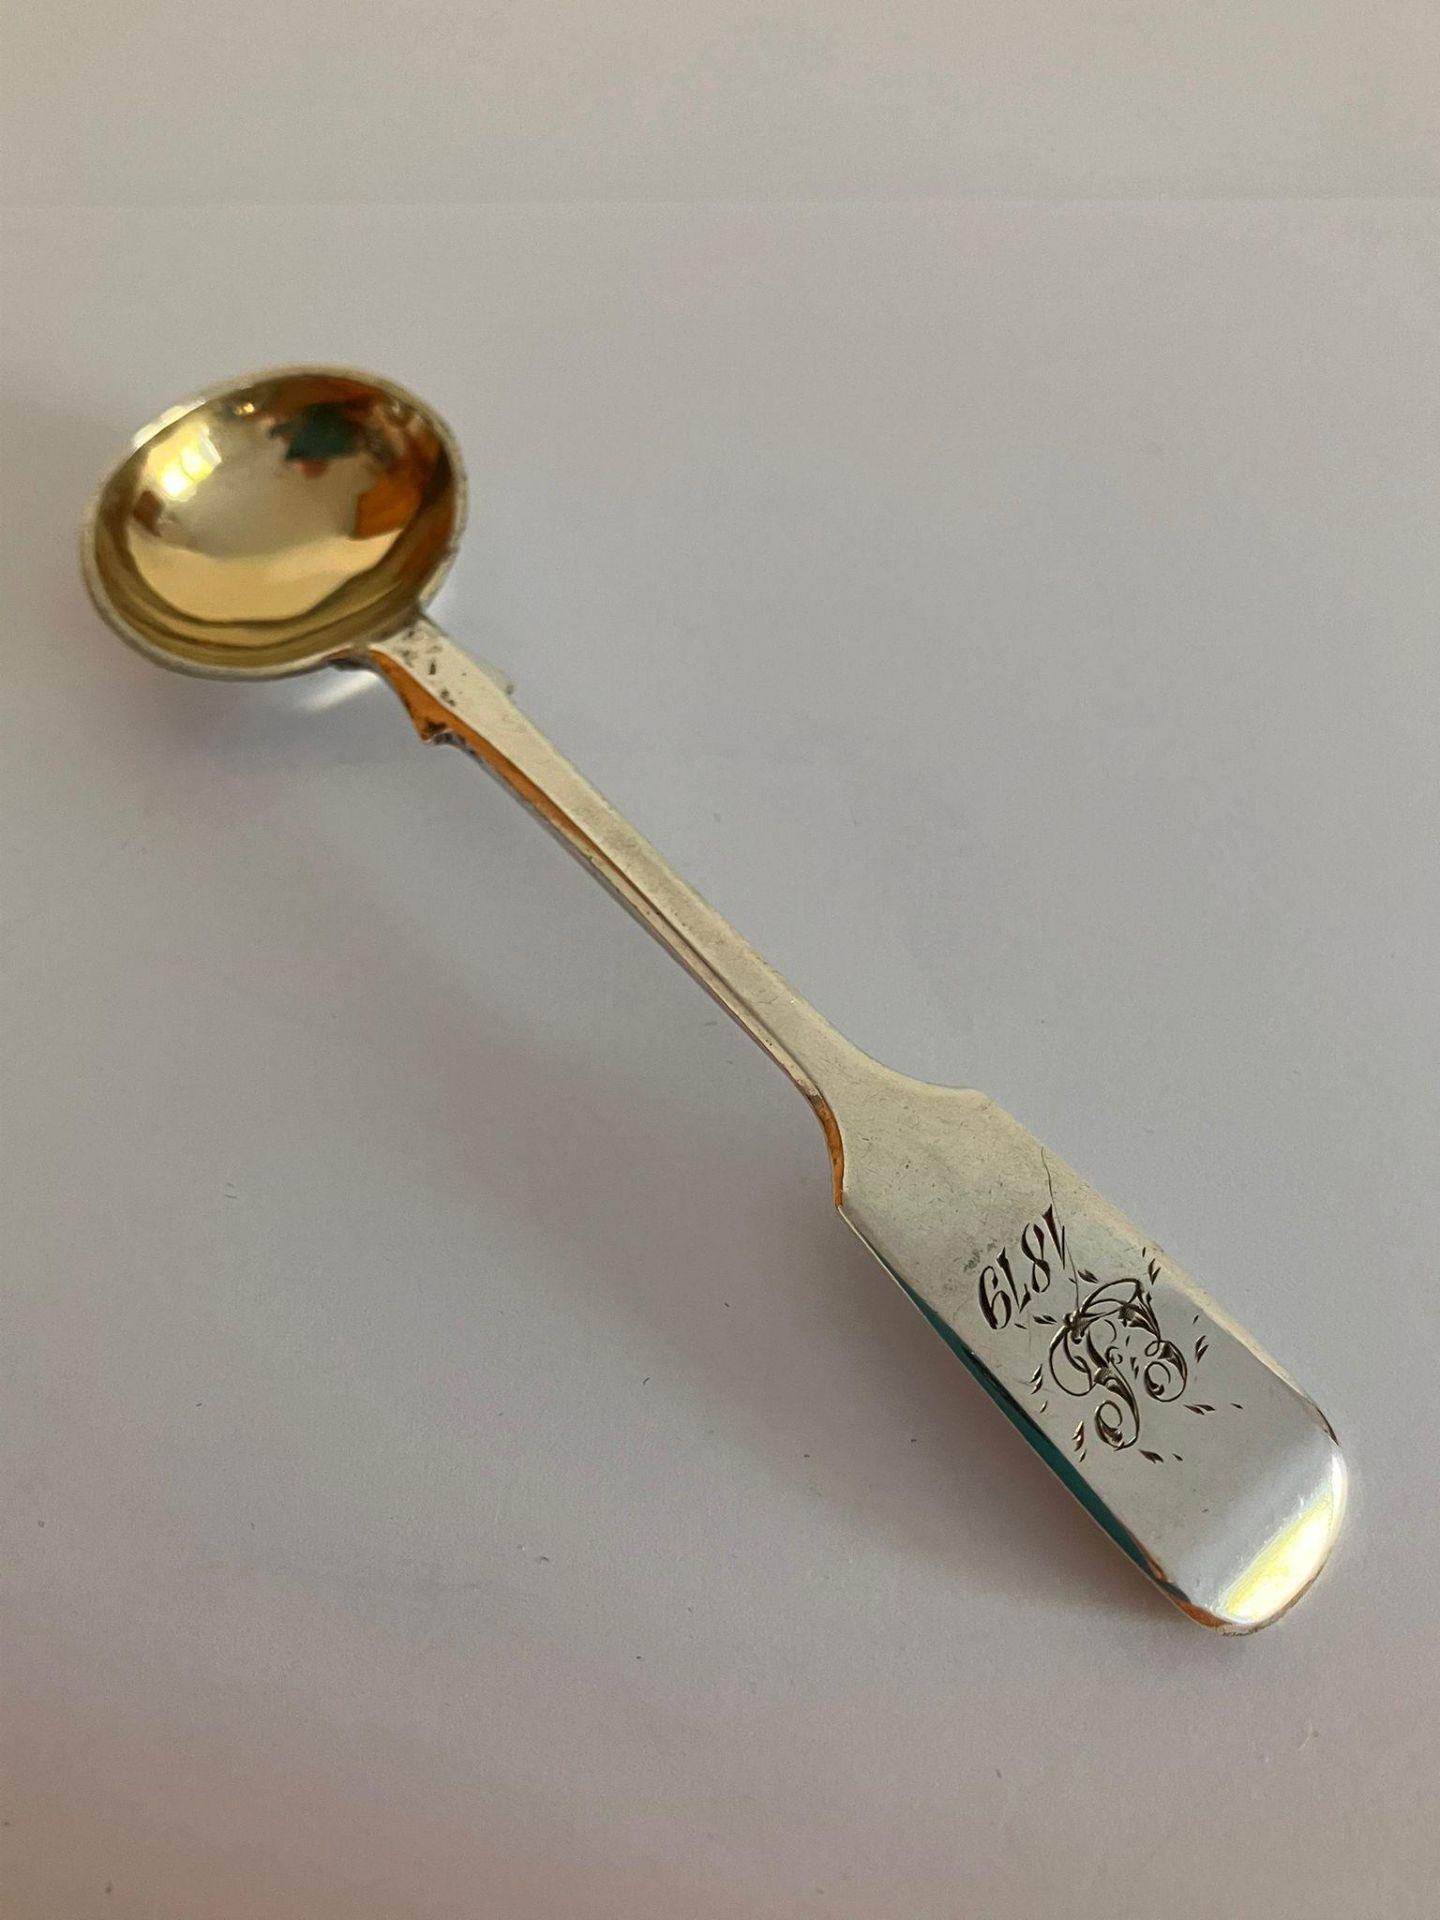 Antique SILVER CONDIMENT SPOON with Gilded Bowl. Clear Hallmark for John Stone, Exeter 1854. - Image 7 of 7